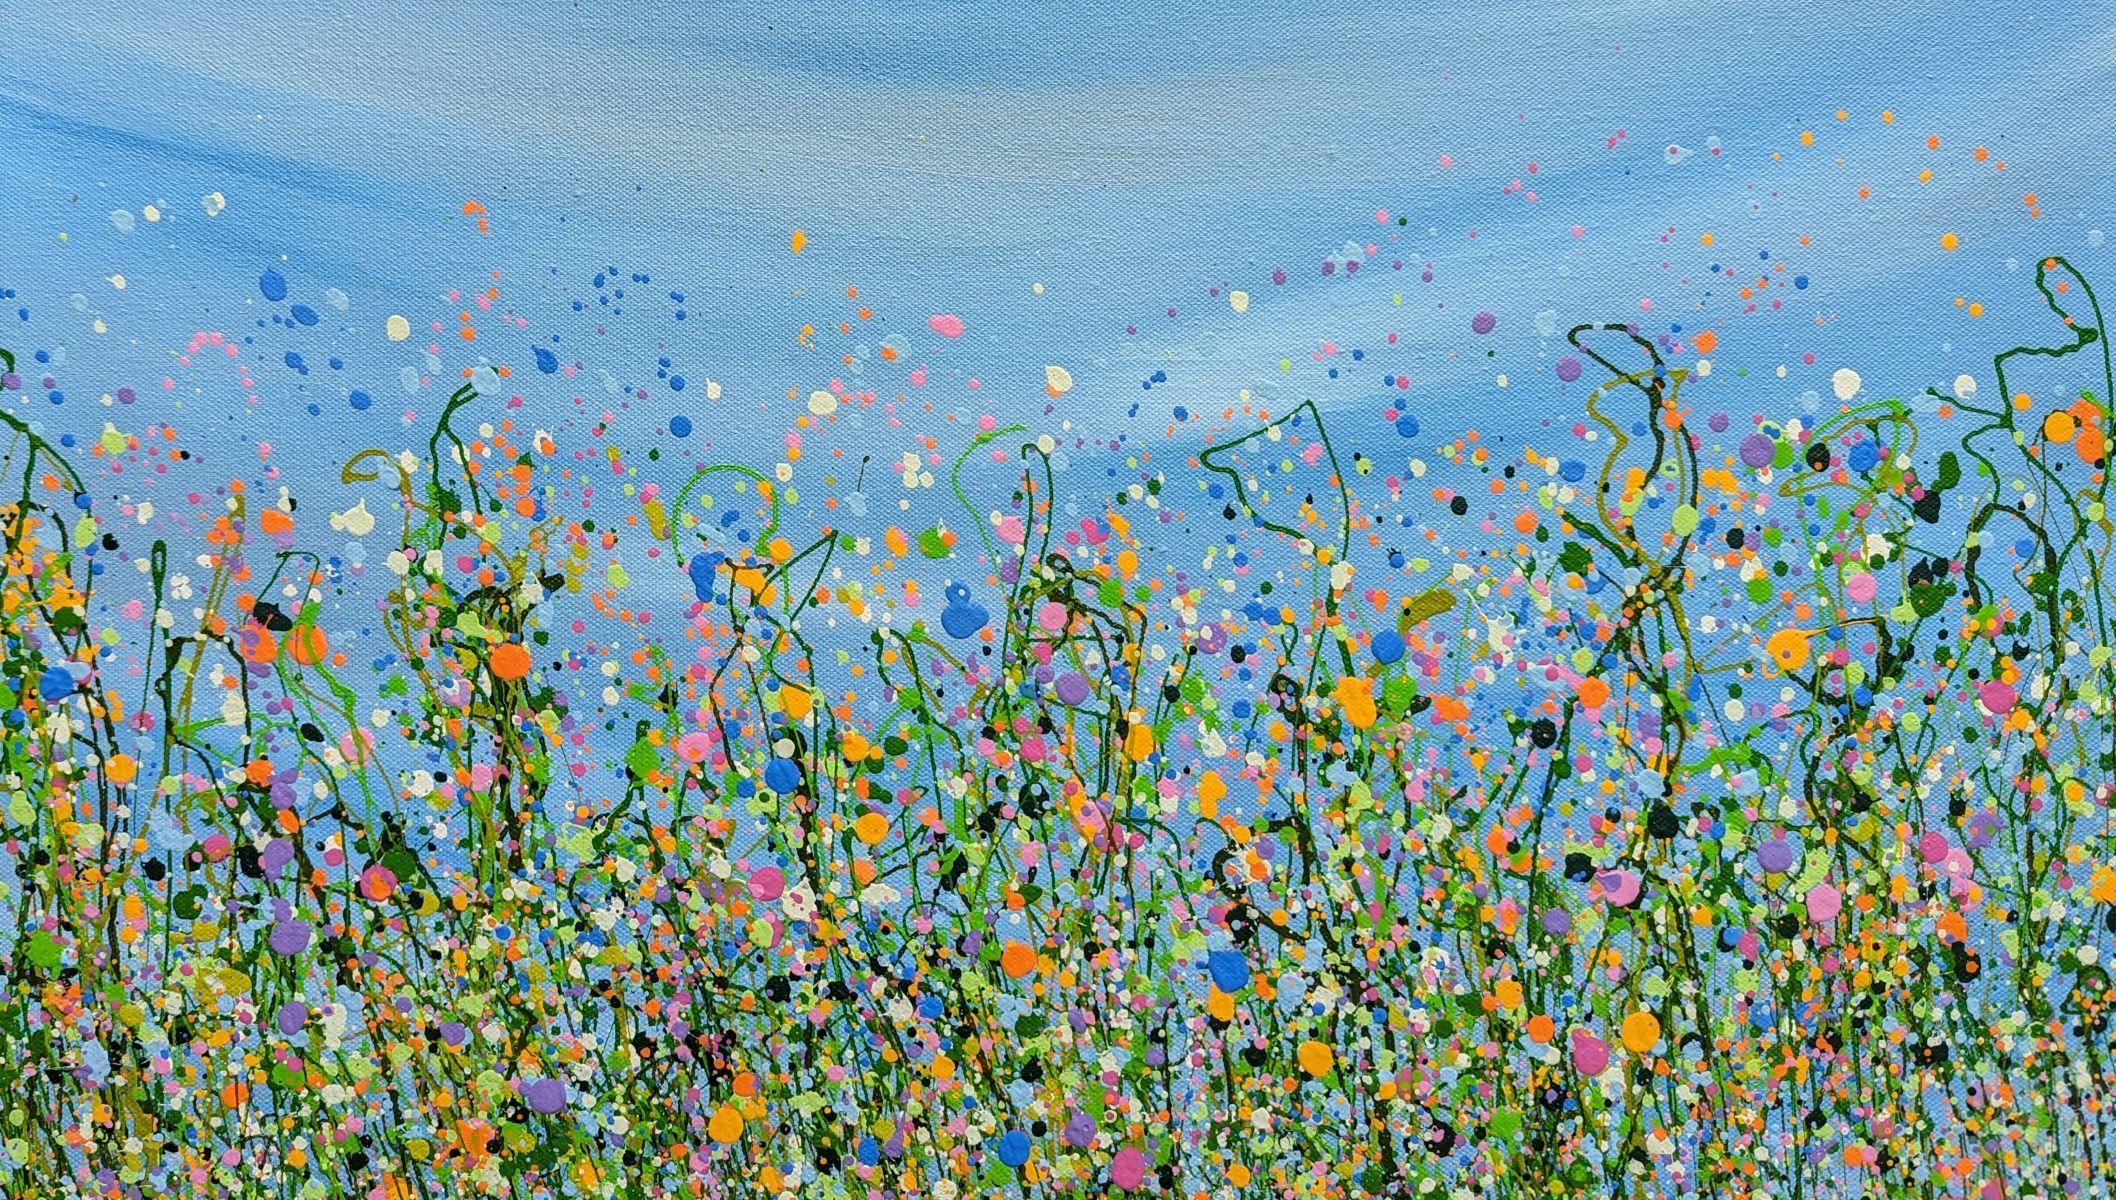 Spring Dreaming - An Original semi-abstract painting by Lucy Moore. Using her signature string grass technique and a vibrant palette Lucy has created a semi-abstract twist to her classic meadow paintings, This piece would brighten any home or